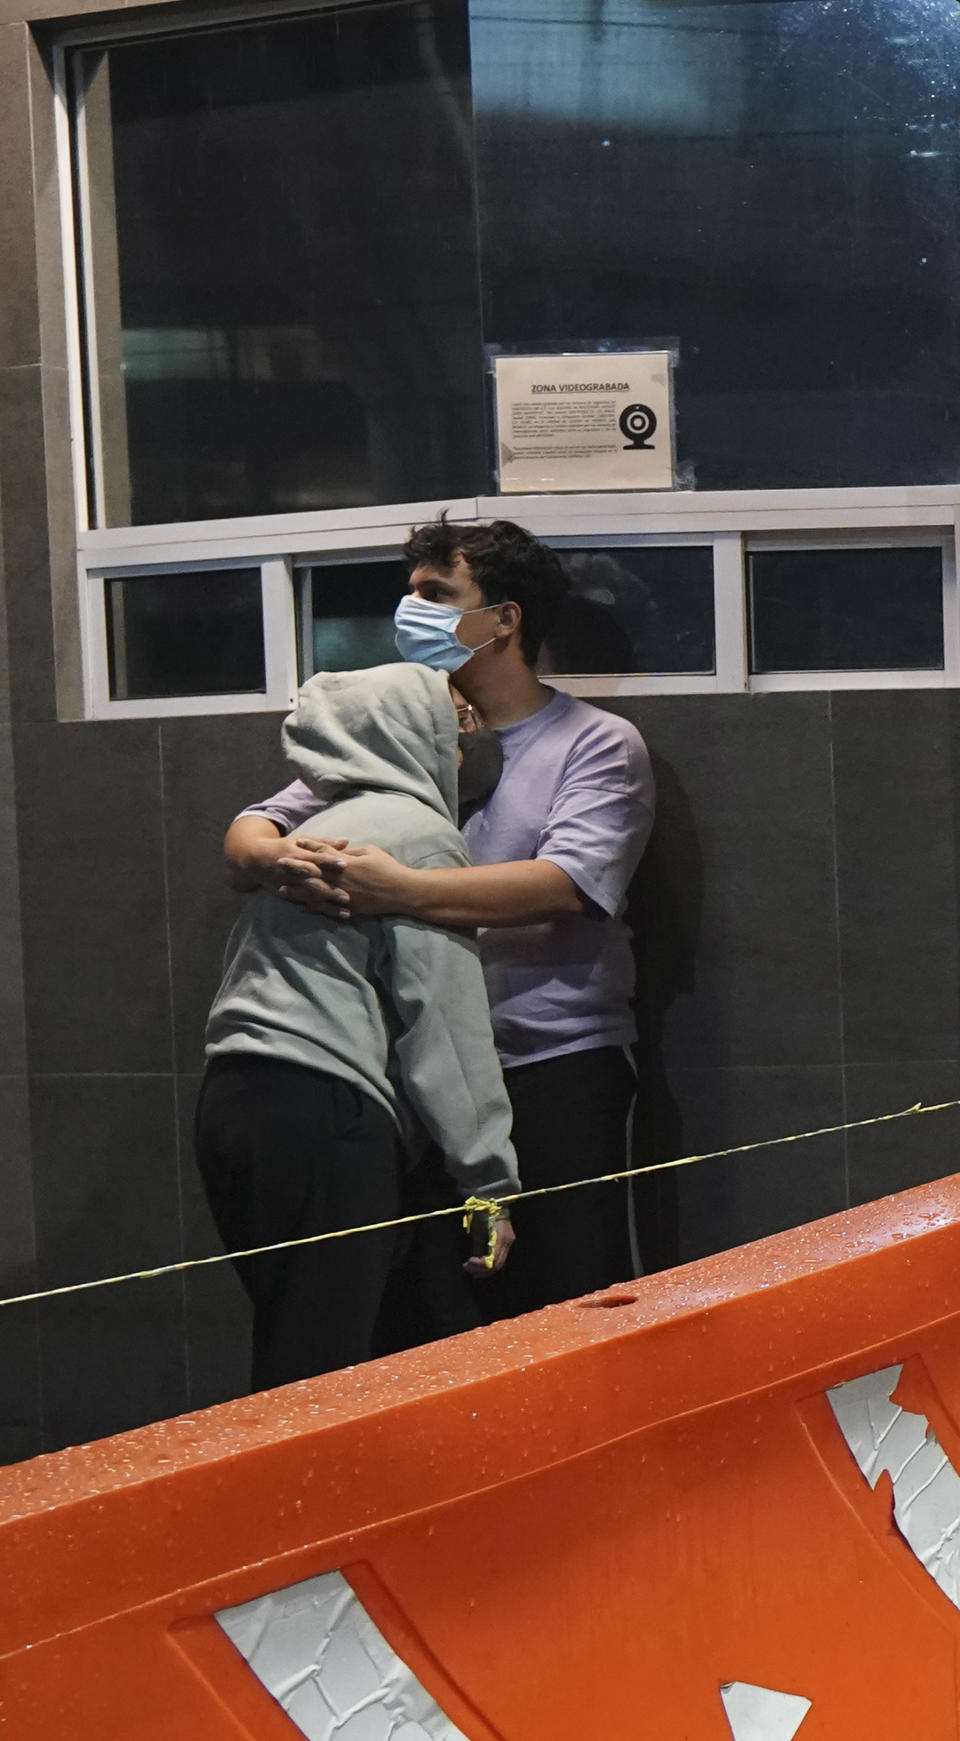 A couple embraces outside a building after a strong earthquake, in Mexico City, Tuesday, Sept. 7, 2021. The quake struck southern Mexico near the resort of Acapulco, causing buildings to rock and sway in Mexico City nearly 200 miles away. (AP Photo/Marco Ugarte)